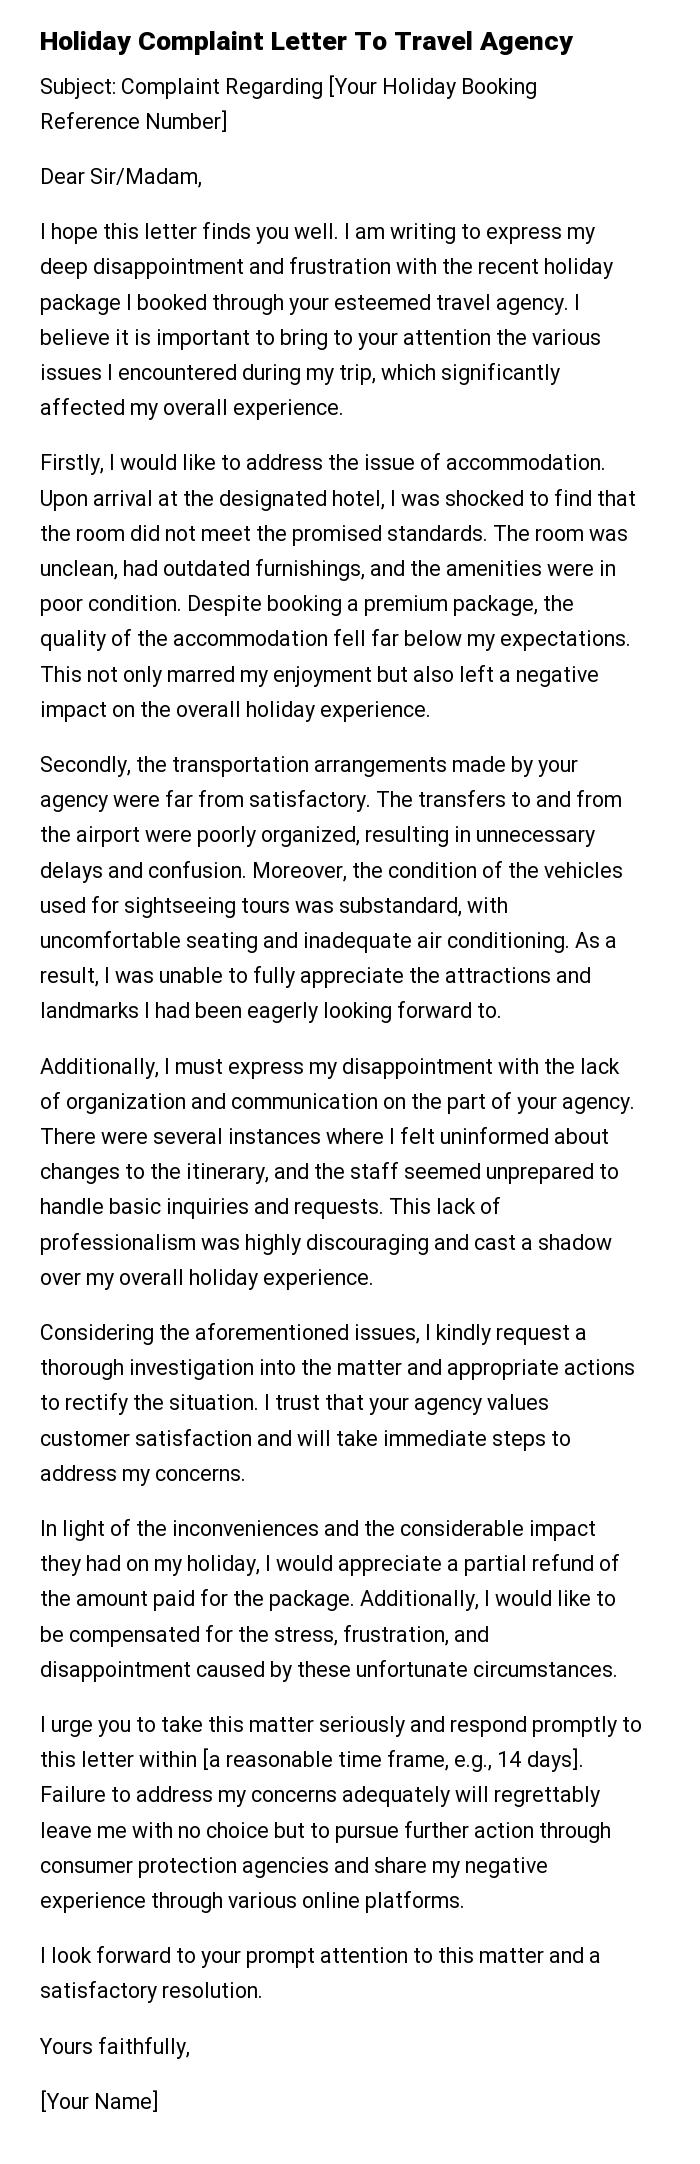 Holiday Complaint Letter To Travel Agency